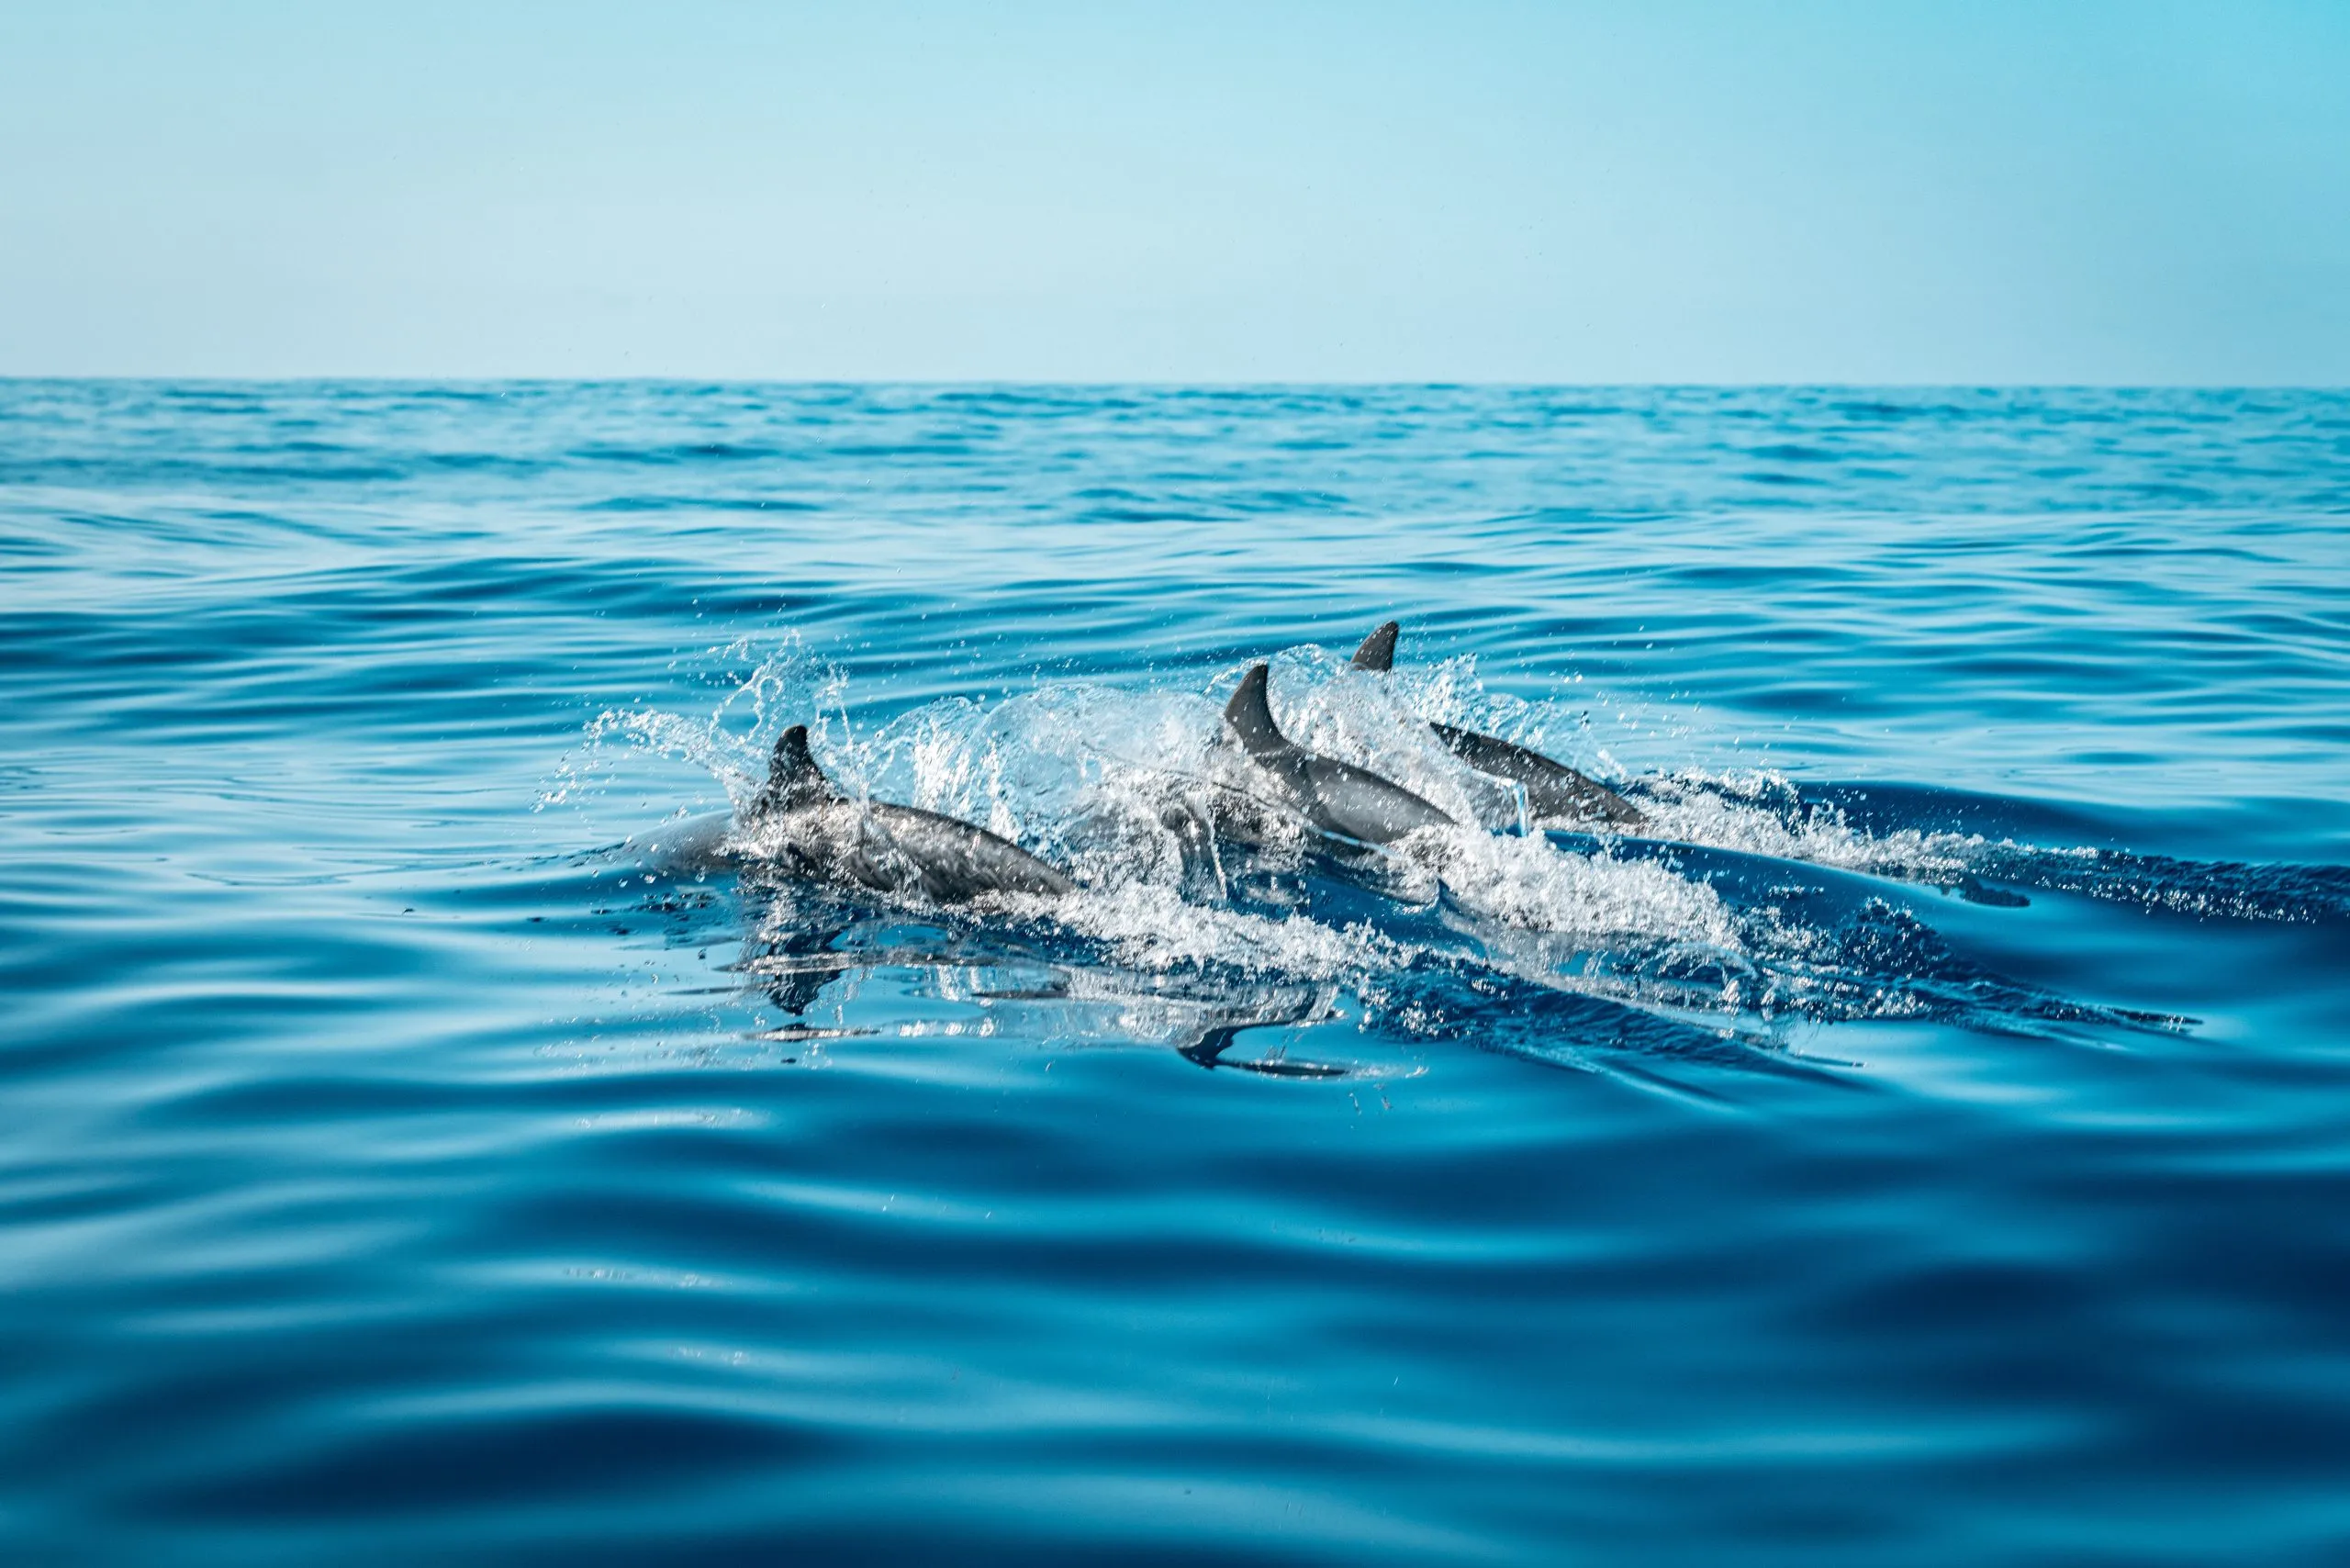 Three dolphins in the seawater under the clear blue sky in Madeira, Portugal